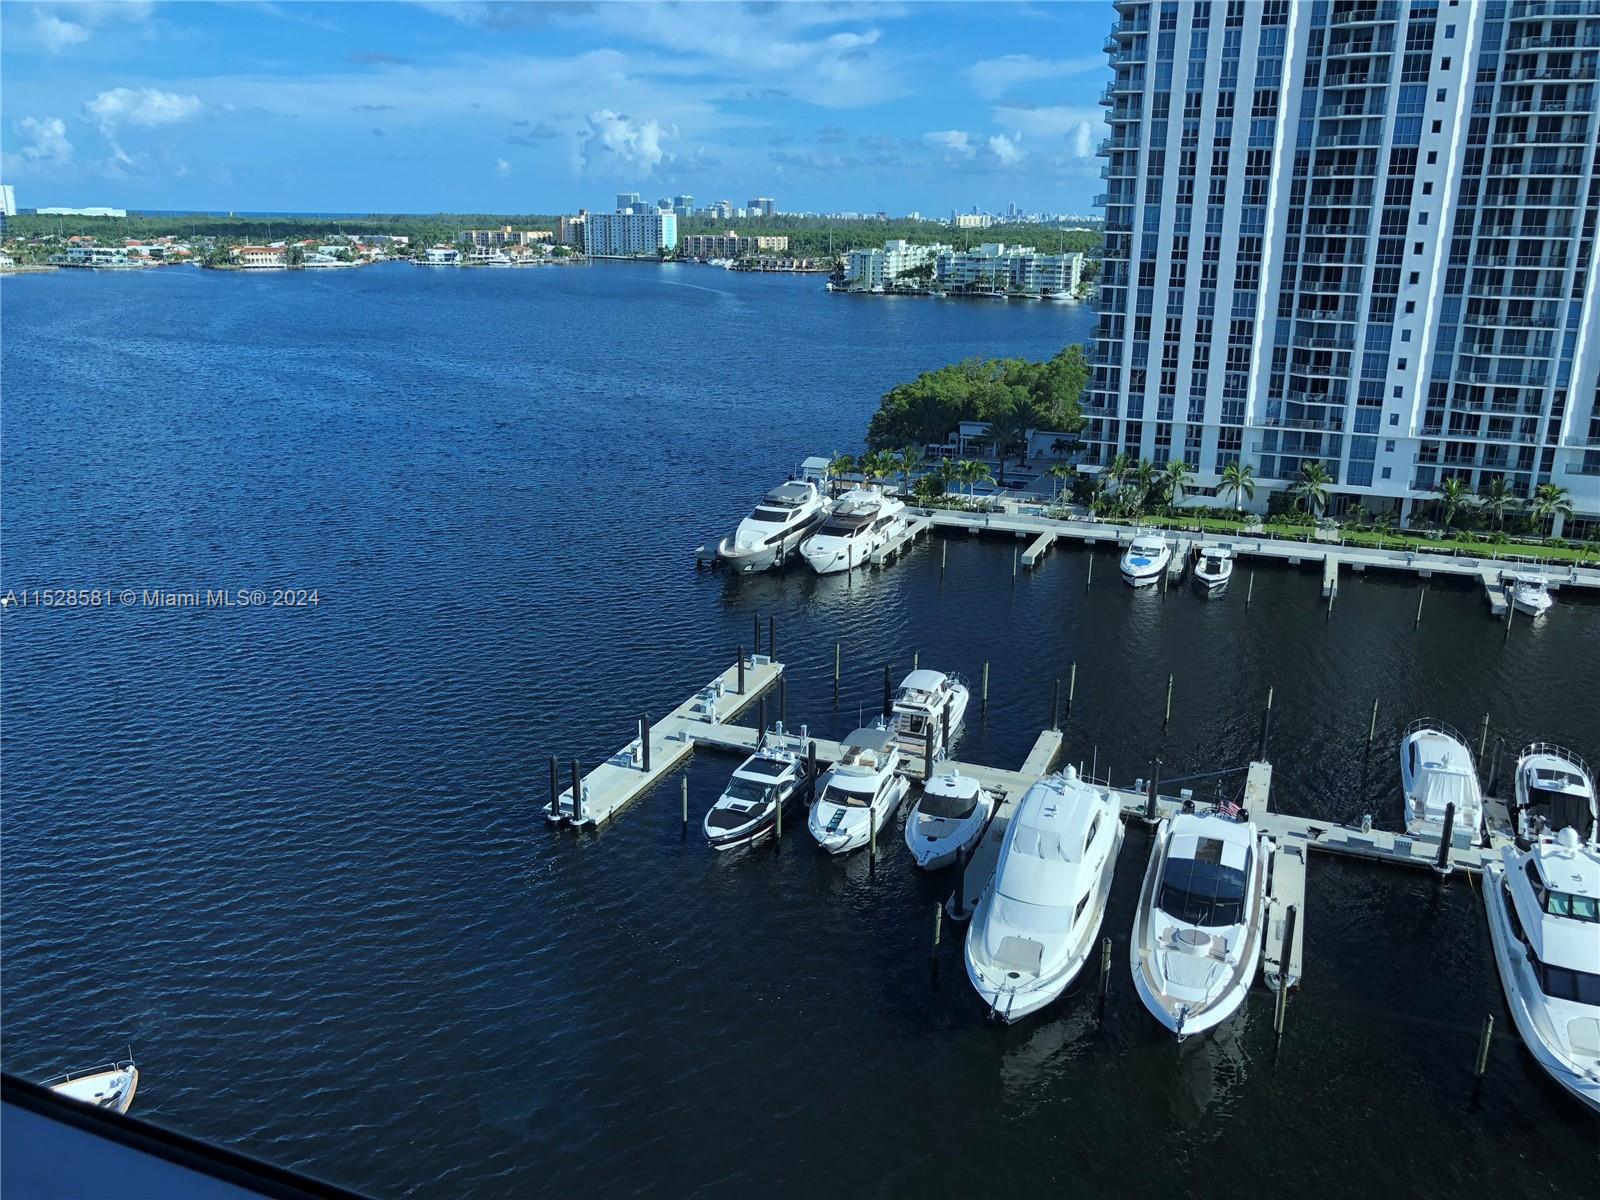 IMPRESSIVE, MODERN, ONE OF THE BEST MARINA AND BAHIA VIEWS, 2 BEDROOMS WITH 2 FULL BATHROOMS UNIT. PORCELAIN FLOORS, SUBZERO FRIDGE AND FREEZER, WOLF APPLIANCES, TOP OF THE LINE FINISHES THROUGHOUT THE WHOLE APT. AMENITIES INCLUDE: INFINITY POOL, KID'S POOL, HOT TUB, SPA WITH SAUNA, STEAN AND MASSAGE ROOM, FITNESS CENTER, TEEN ROOM, BUSINESS ROOM, AND MORE! UNIT COMES WITH A BIG STORAGE SPACE INCLUDED AND 2 PARKING SPACES, 1 FIXED, COVERED AND THE OTHER ONE WITH VALET. DON'T MISS THIS OPPORTUNITY TO OWN ONE OF THE BEST PLACES IN THE MARKET!